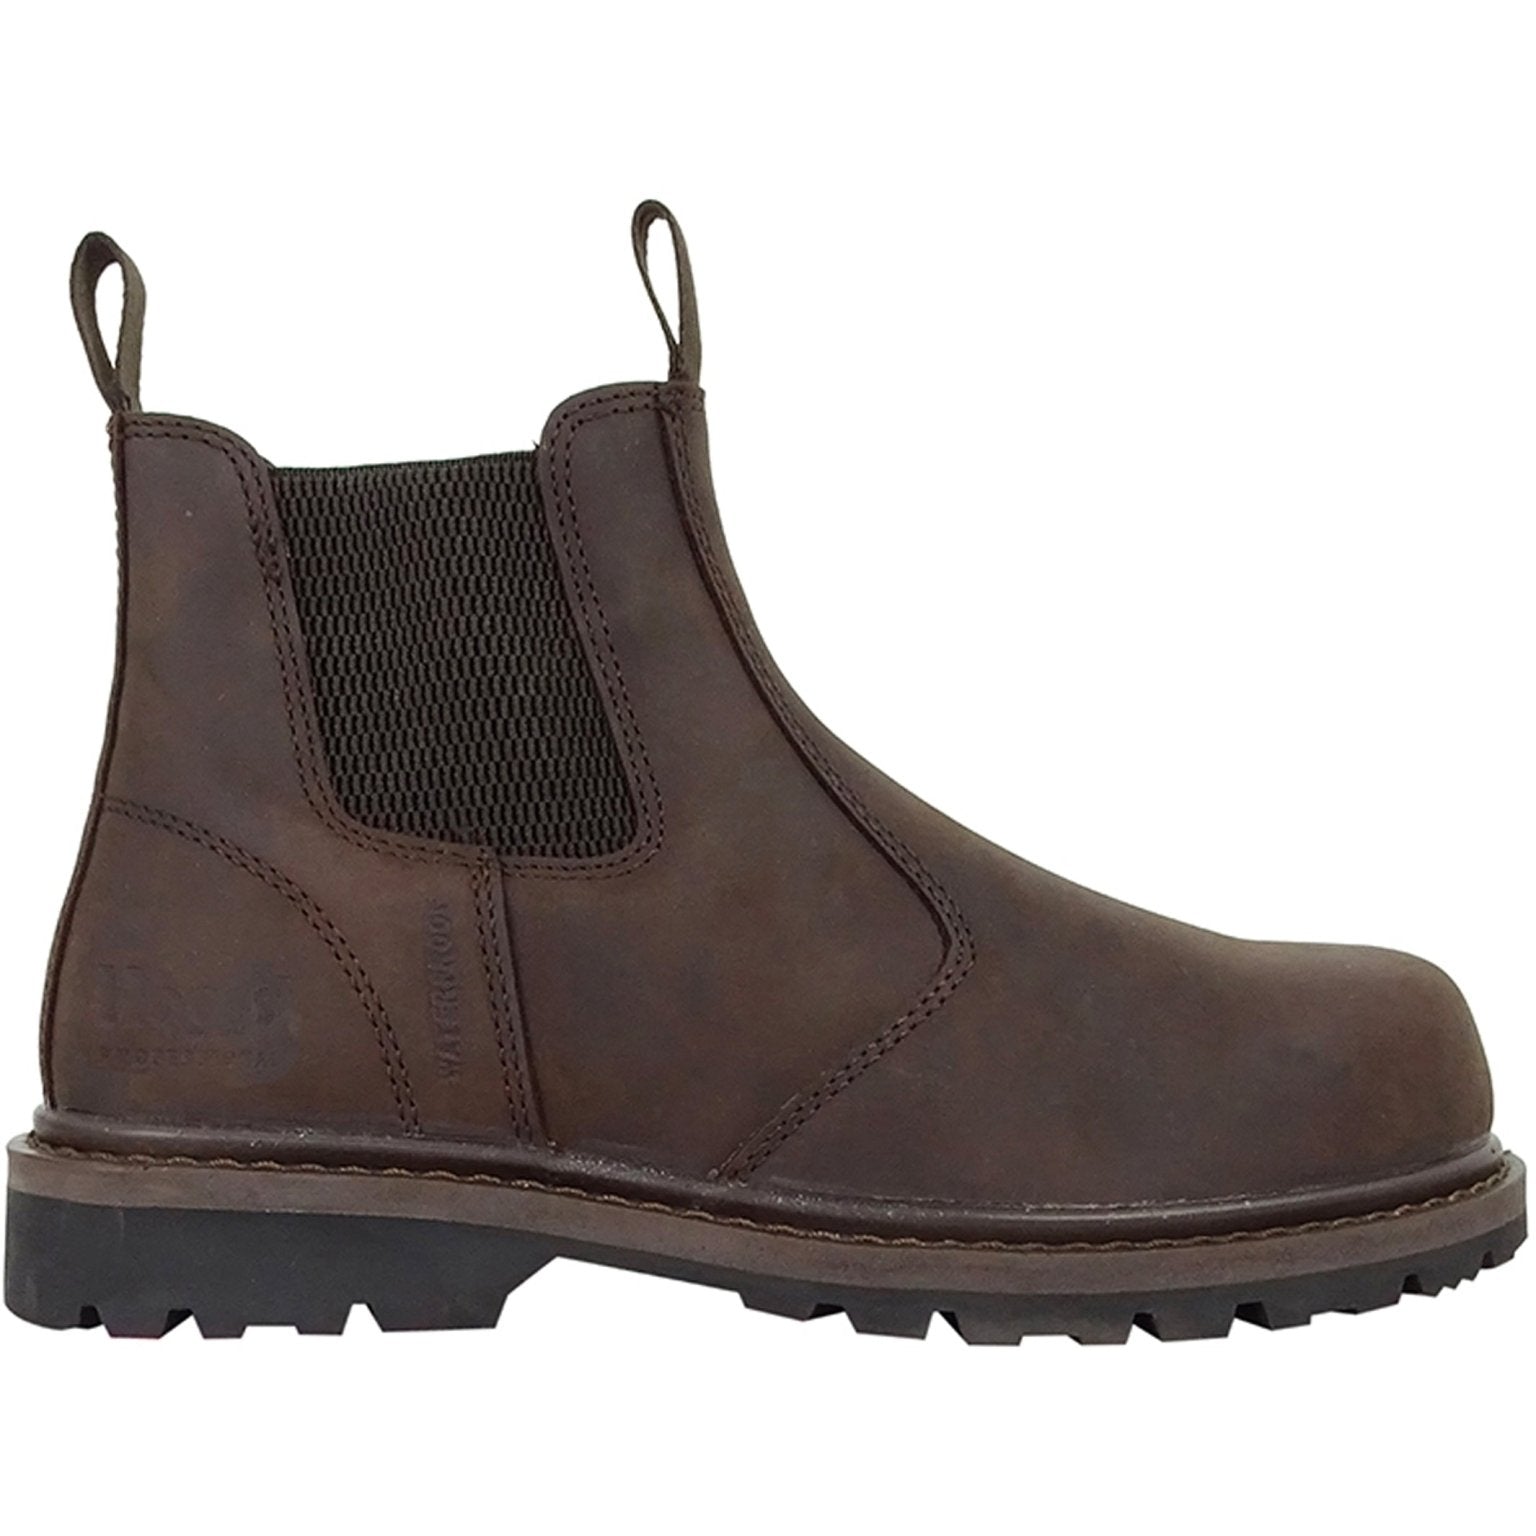 Hoggs of Fife Hoggs of Fife - Zeus Waterproof Safety Chelsea Boots - Waterproof Dealer Safety Boots Safety Footwear